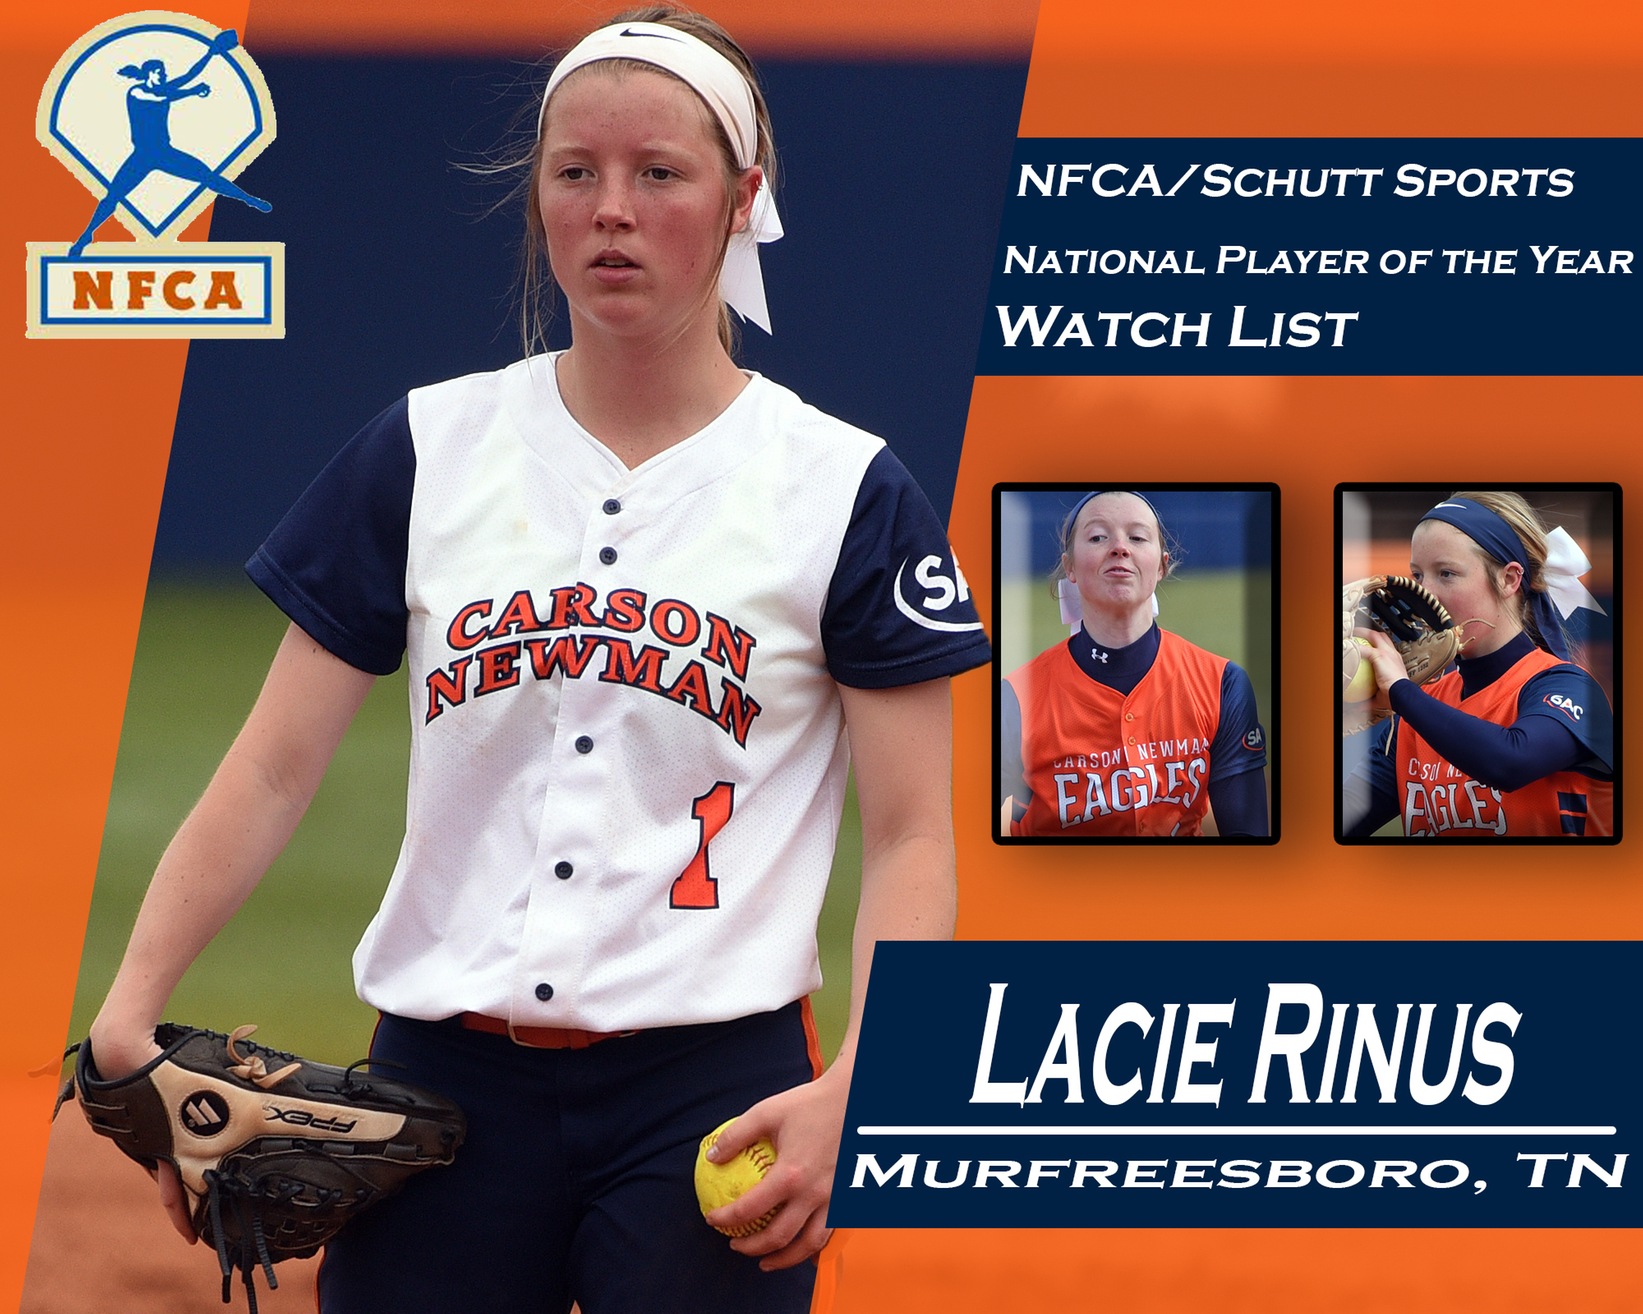 Rinus named to NFCA/Schutt Sports Division II National Player of the Year award watch list